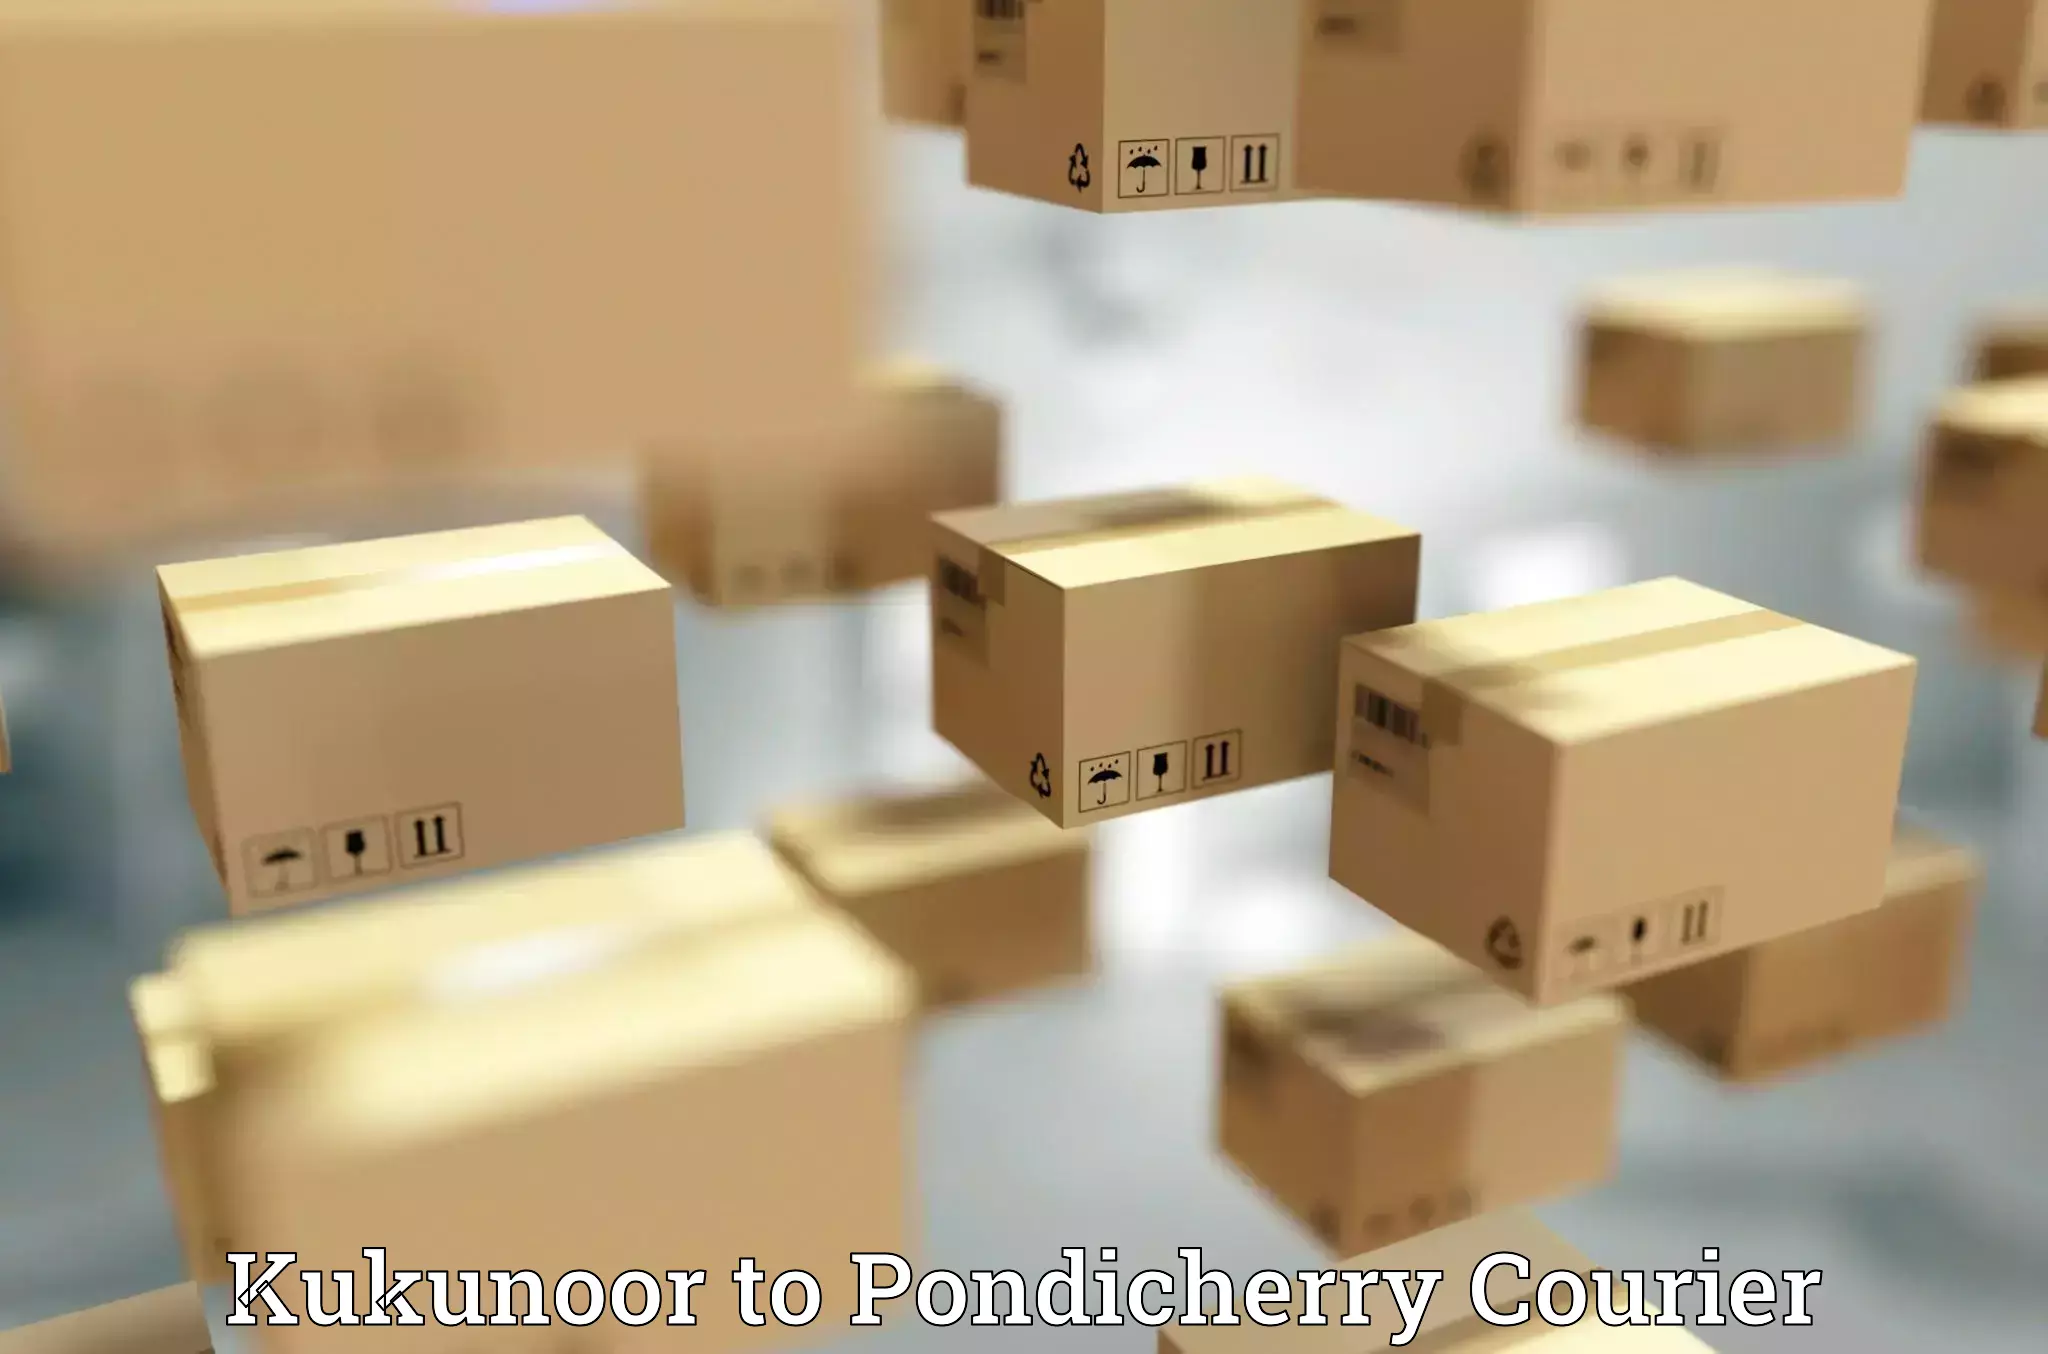 Tech-enabled shipping Kukunoor to Pondicherry